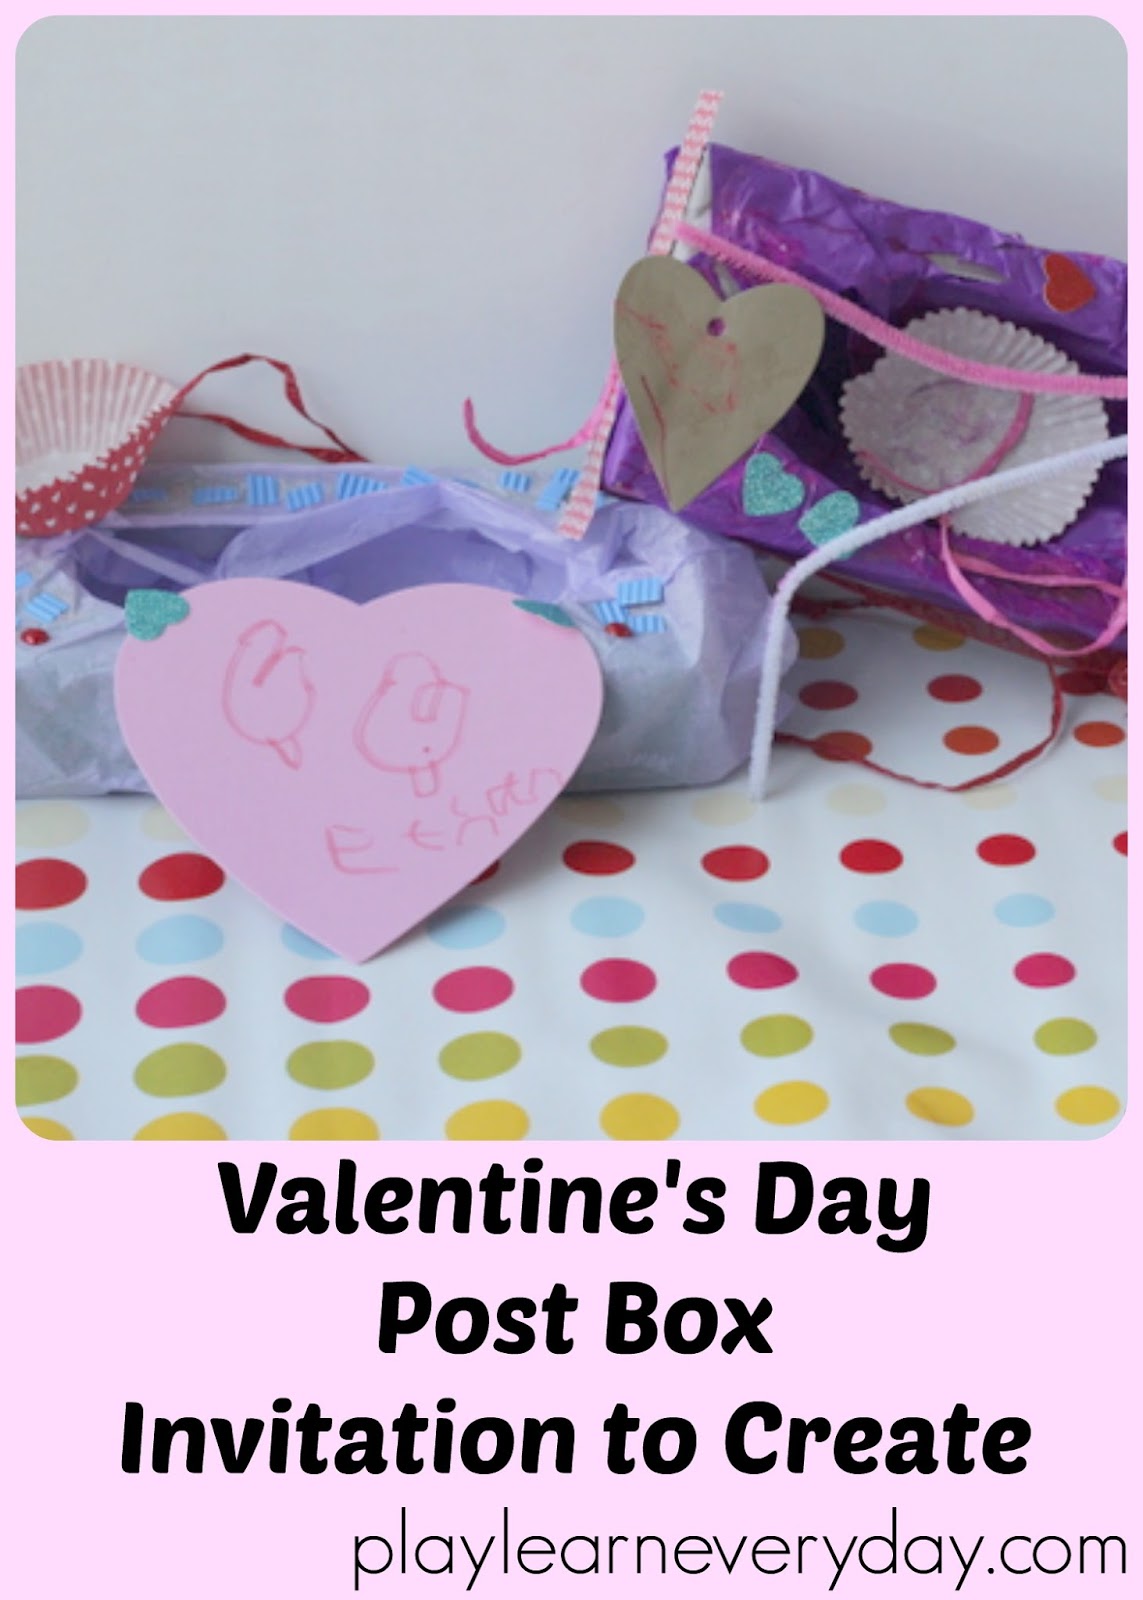 Valentine's Day Post Box Invitation to Create Play and Learn Every Day